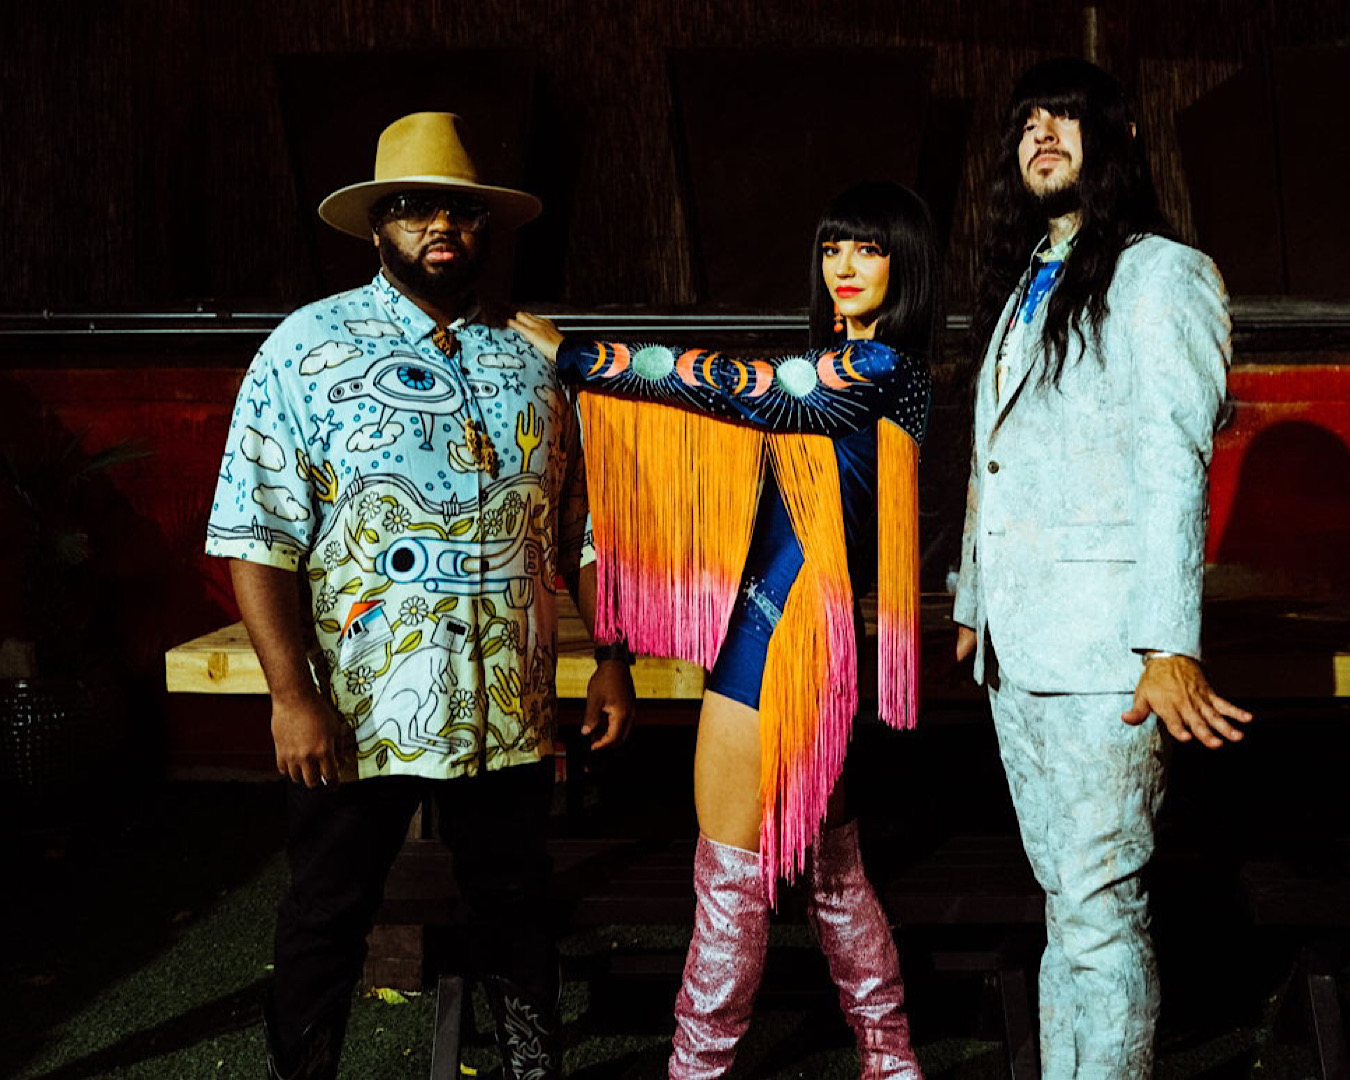 The three members of Khruangbin pose together in epic outfits exuding cool.  